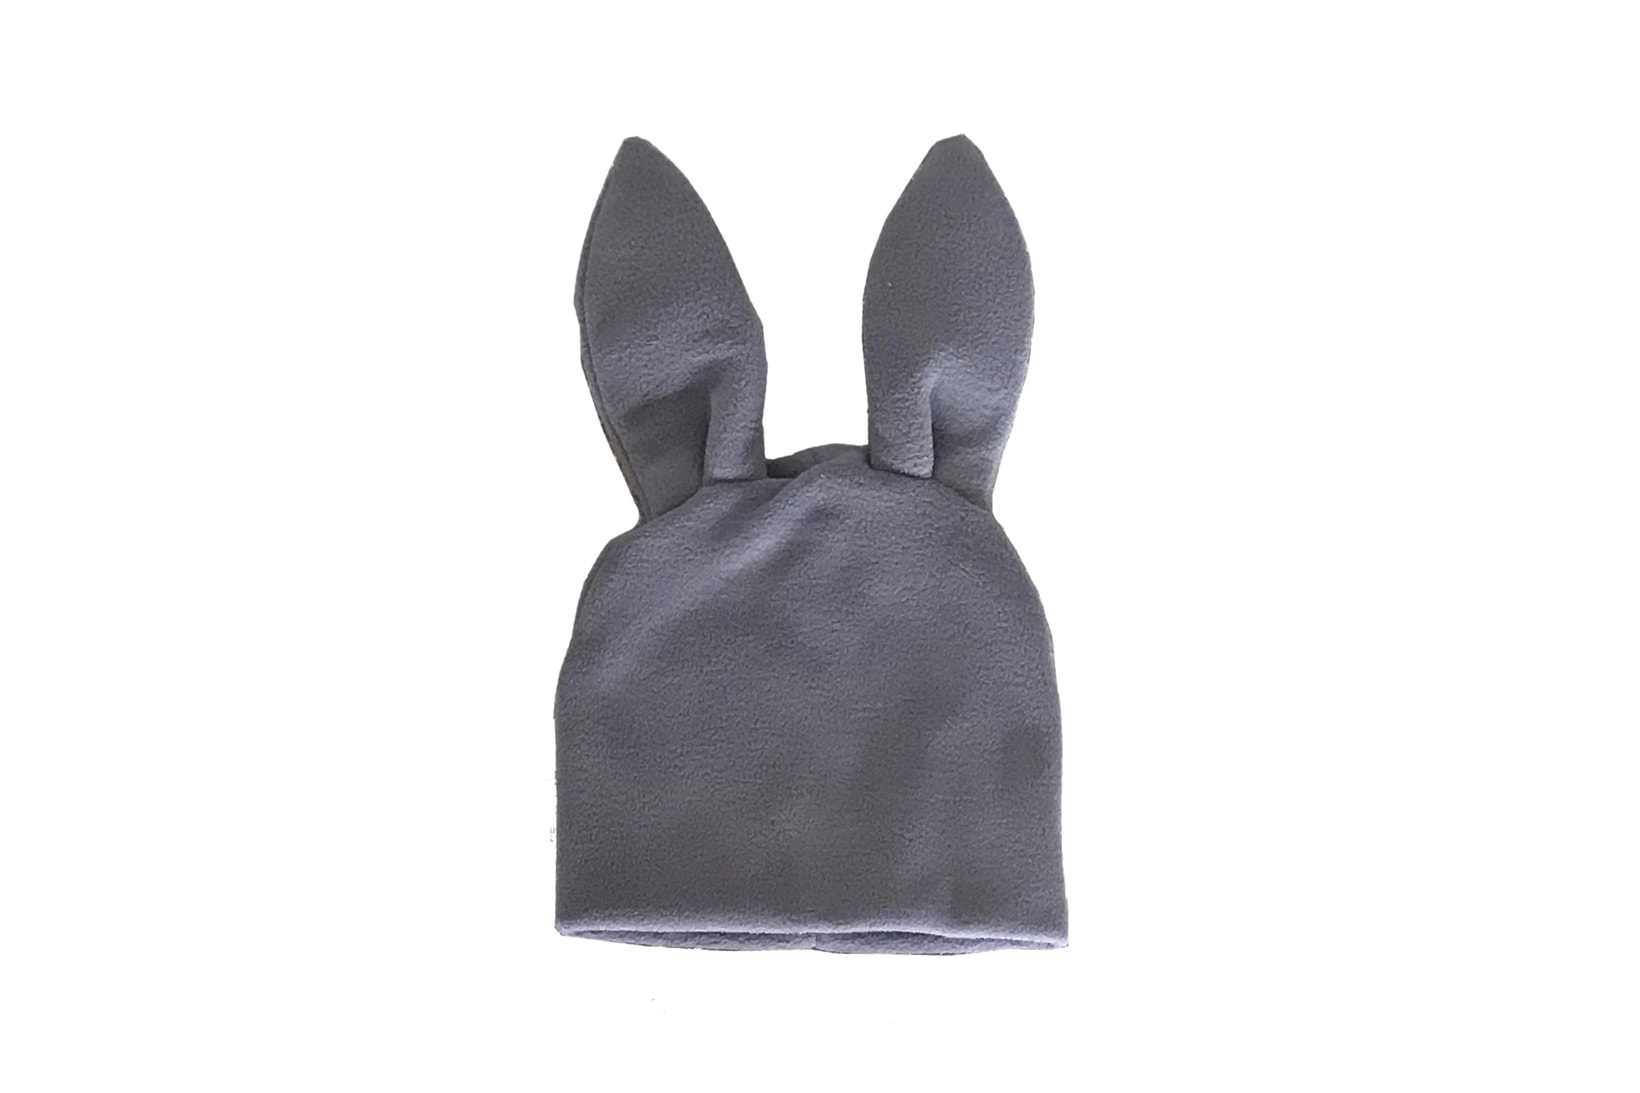 Comme des Garcons Shirt Bunny Ears Woven Beanie Grey